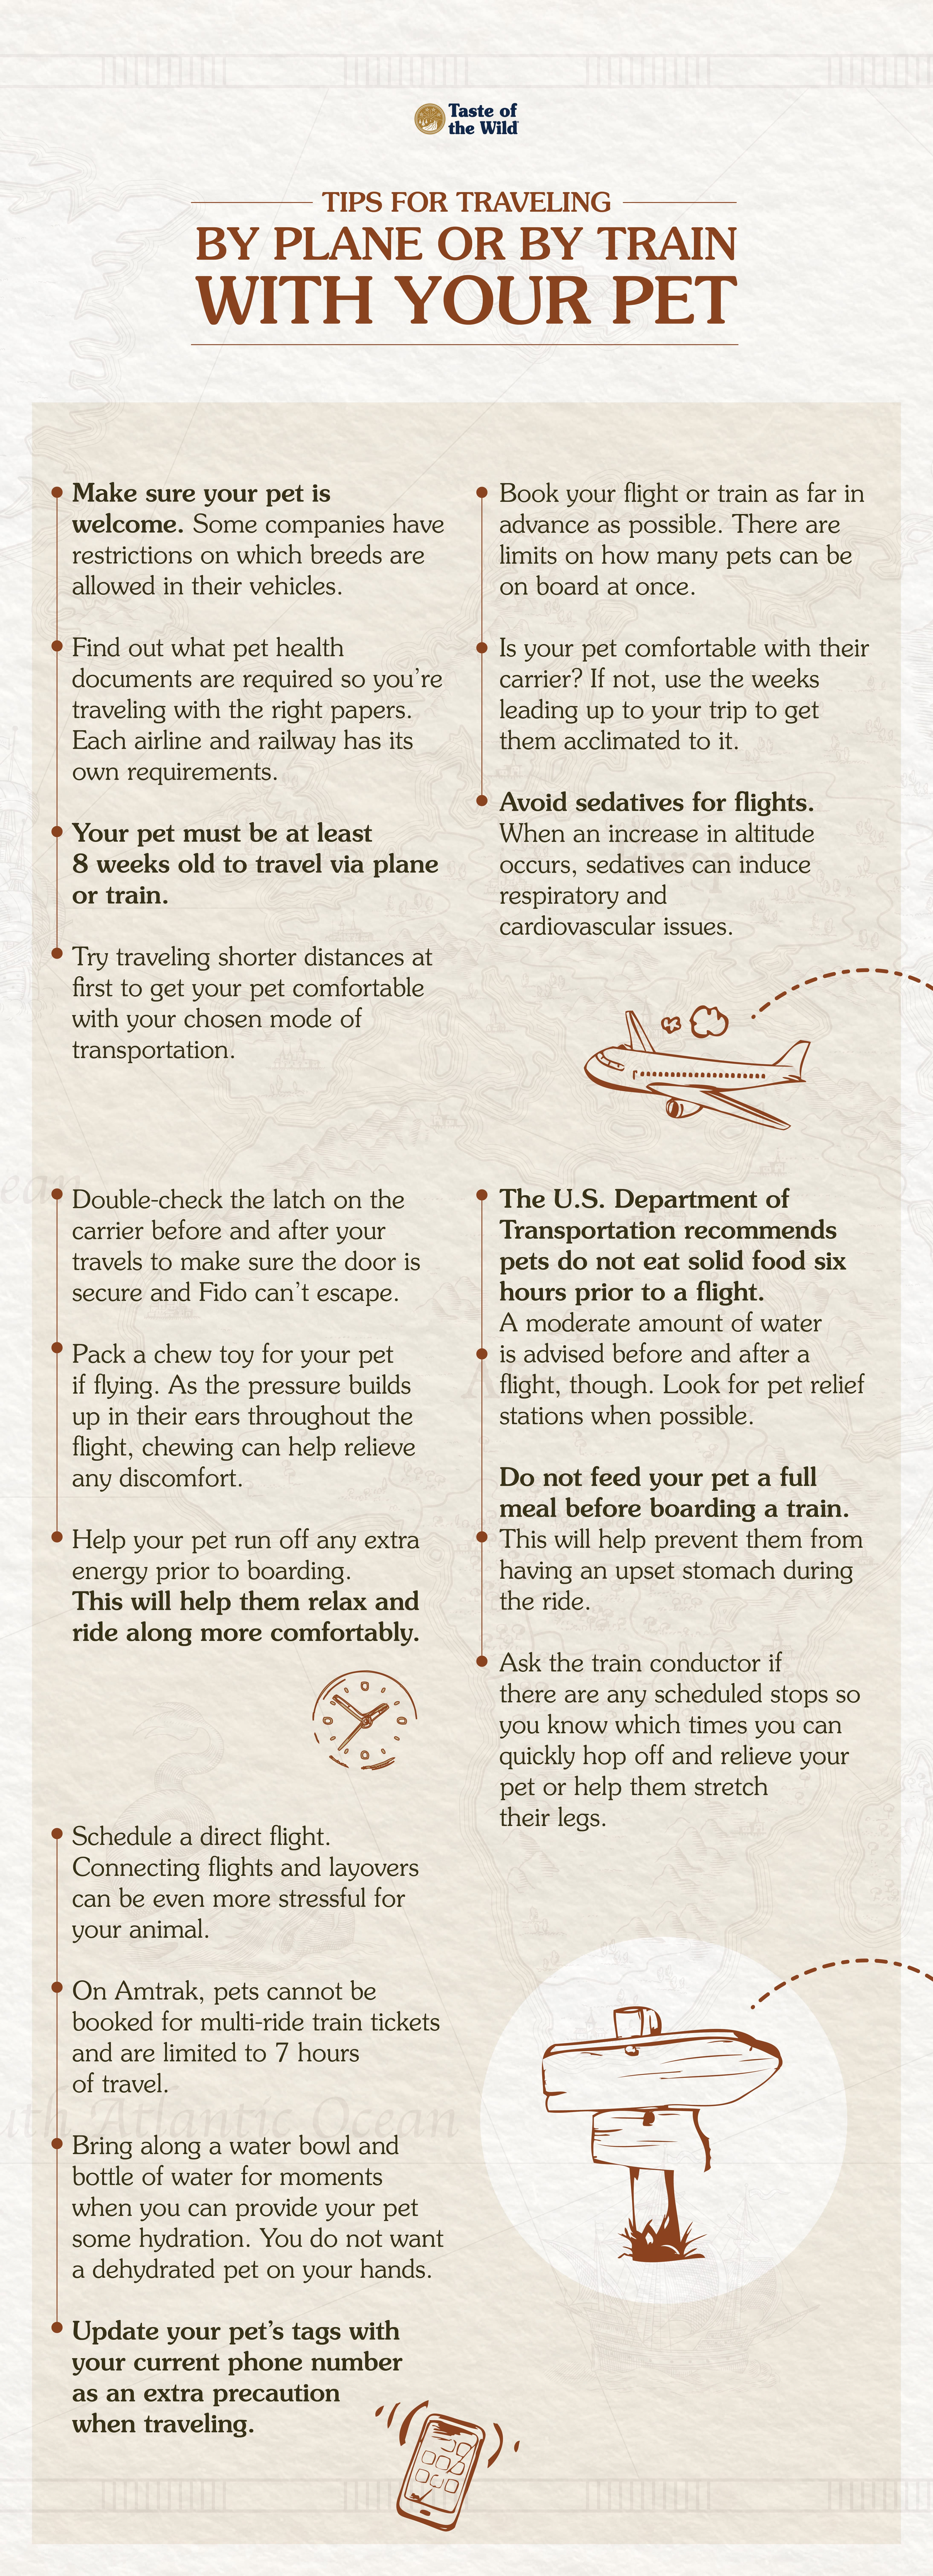 Tips for Traveling with Pets Infographic | Taste of the Wild